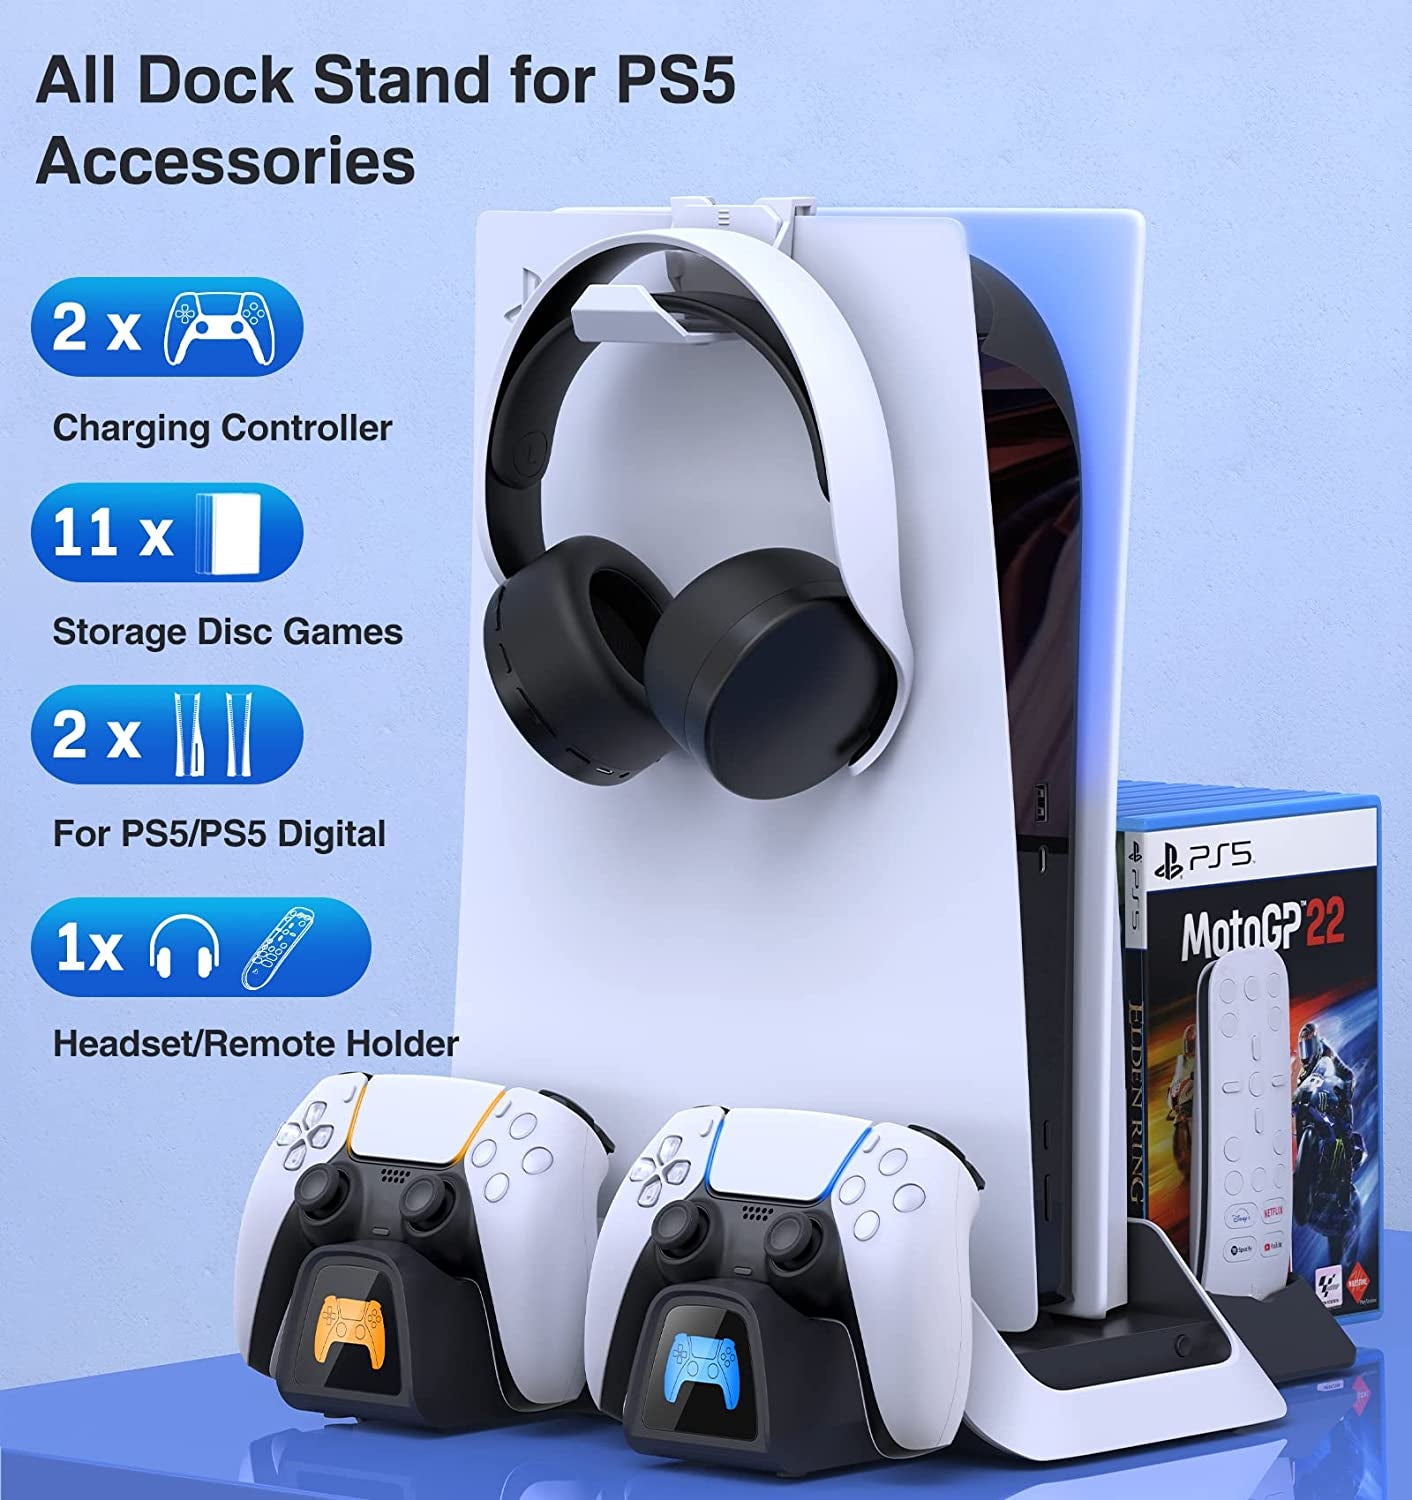 Professional PS5 Stand with Cooling Station, Dual Controller Charger, and Accessories for Playstation 5 Console - Includes 5V/3A Adapter, Cooler Fan, Charging Dock, and Game Holder (Black)